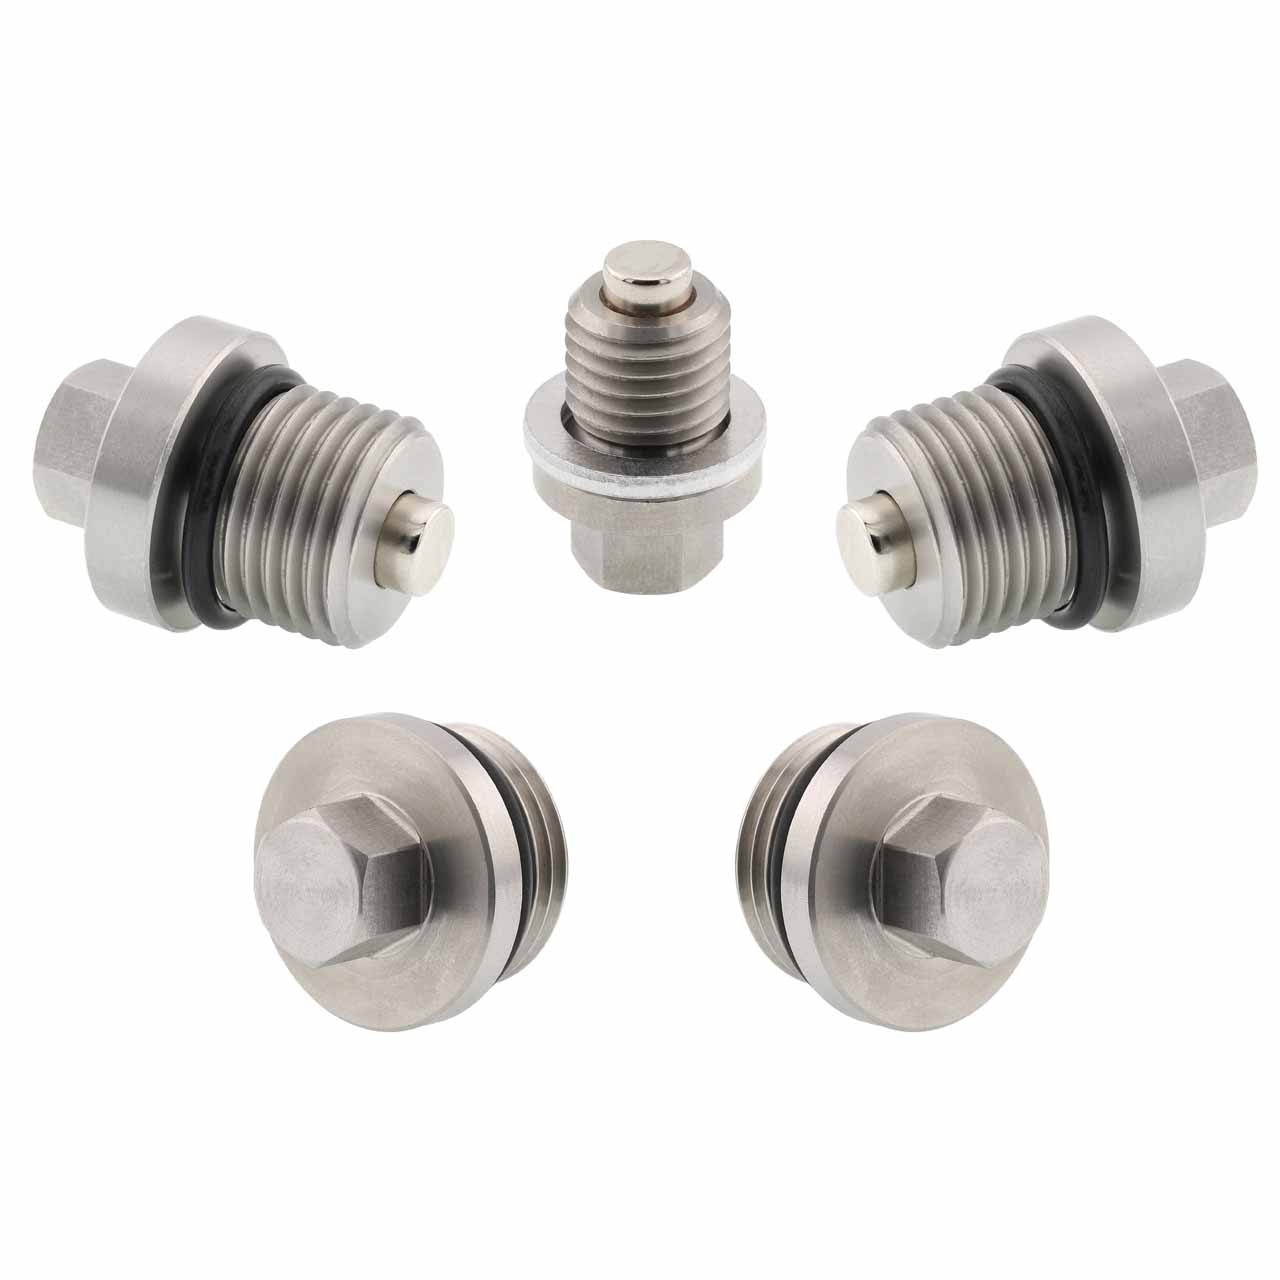 Polaris ACE 900 SP Magnetic Oil Drain Plug Kit - 2016 - Engine, Transmission, Differential - Made In USA